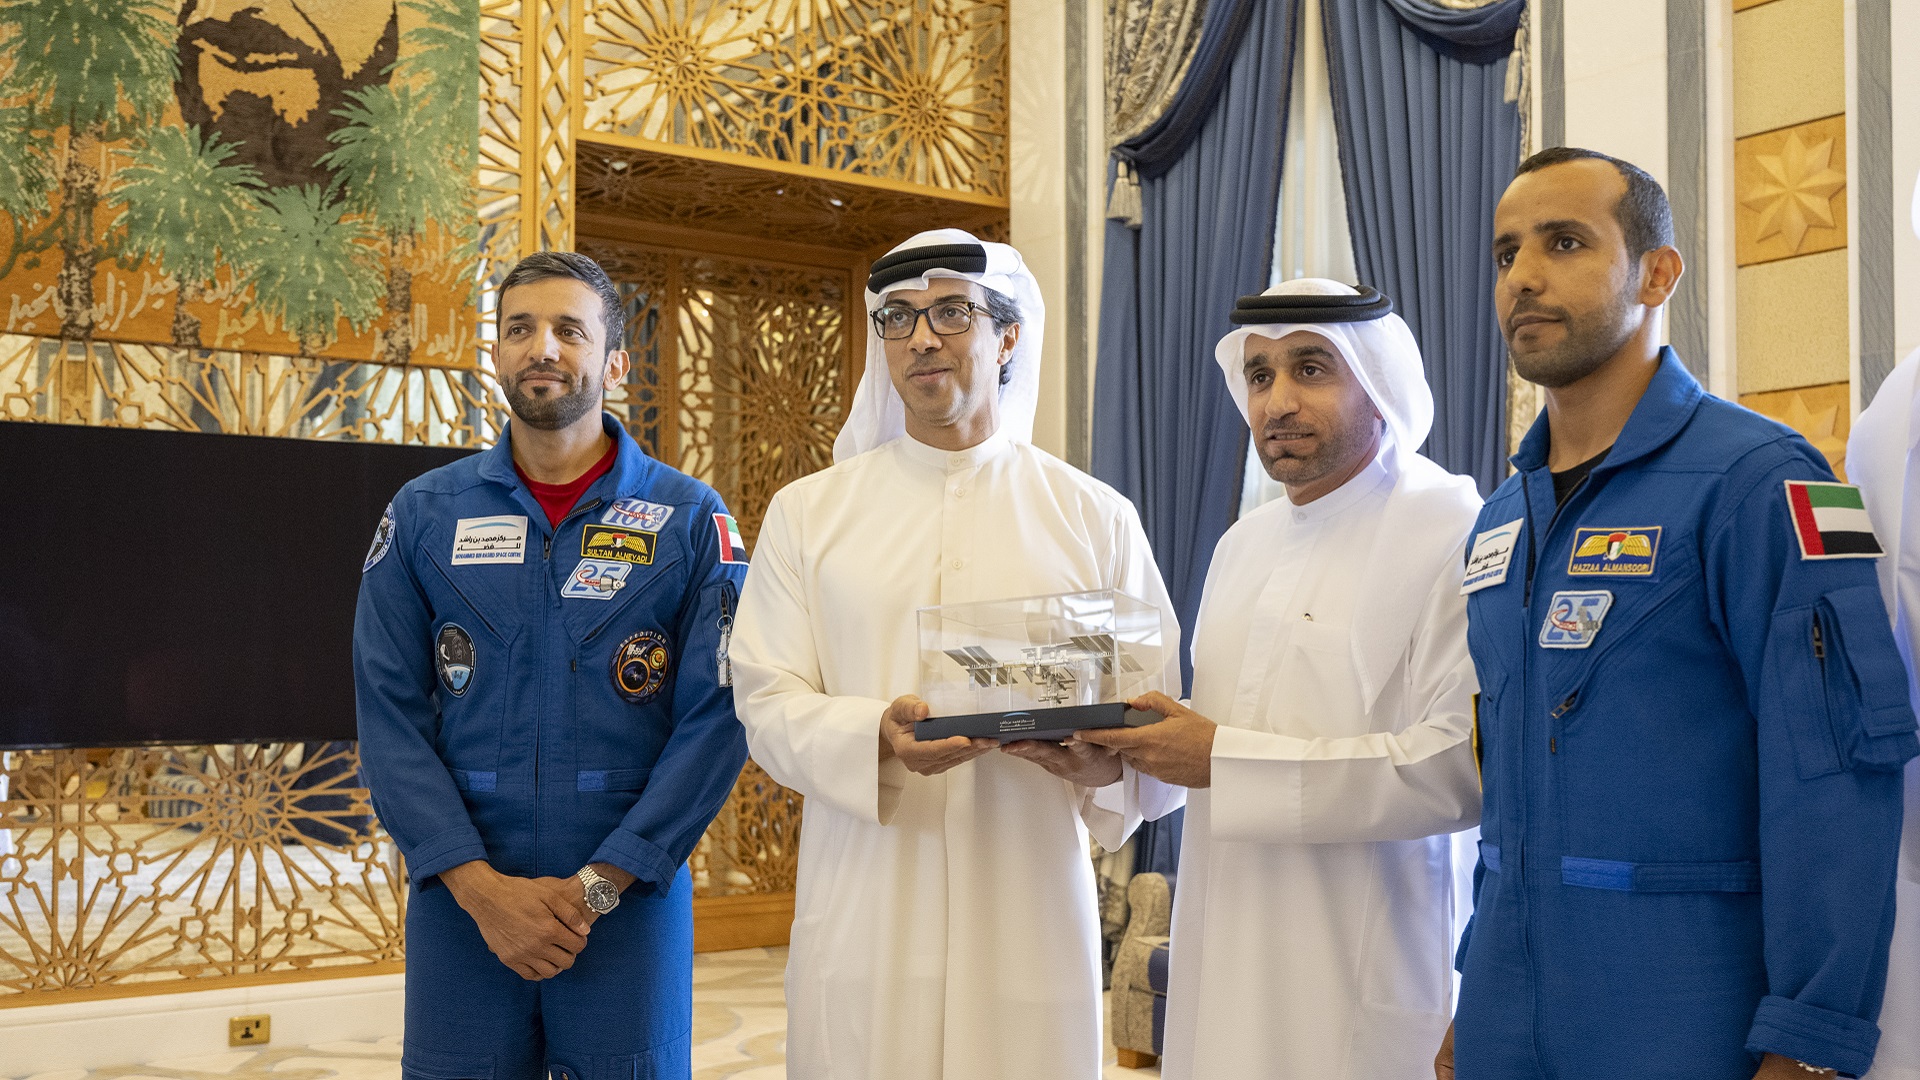 Vice President of the UAE marked the Mohammed bin Rashid Space Centre's Zayed Ambition 2 mission.